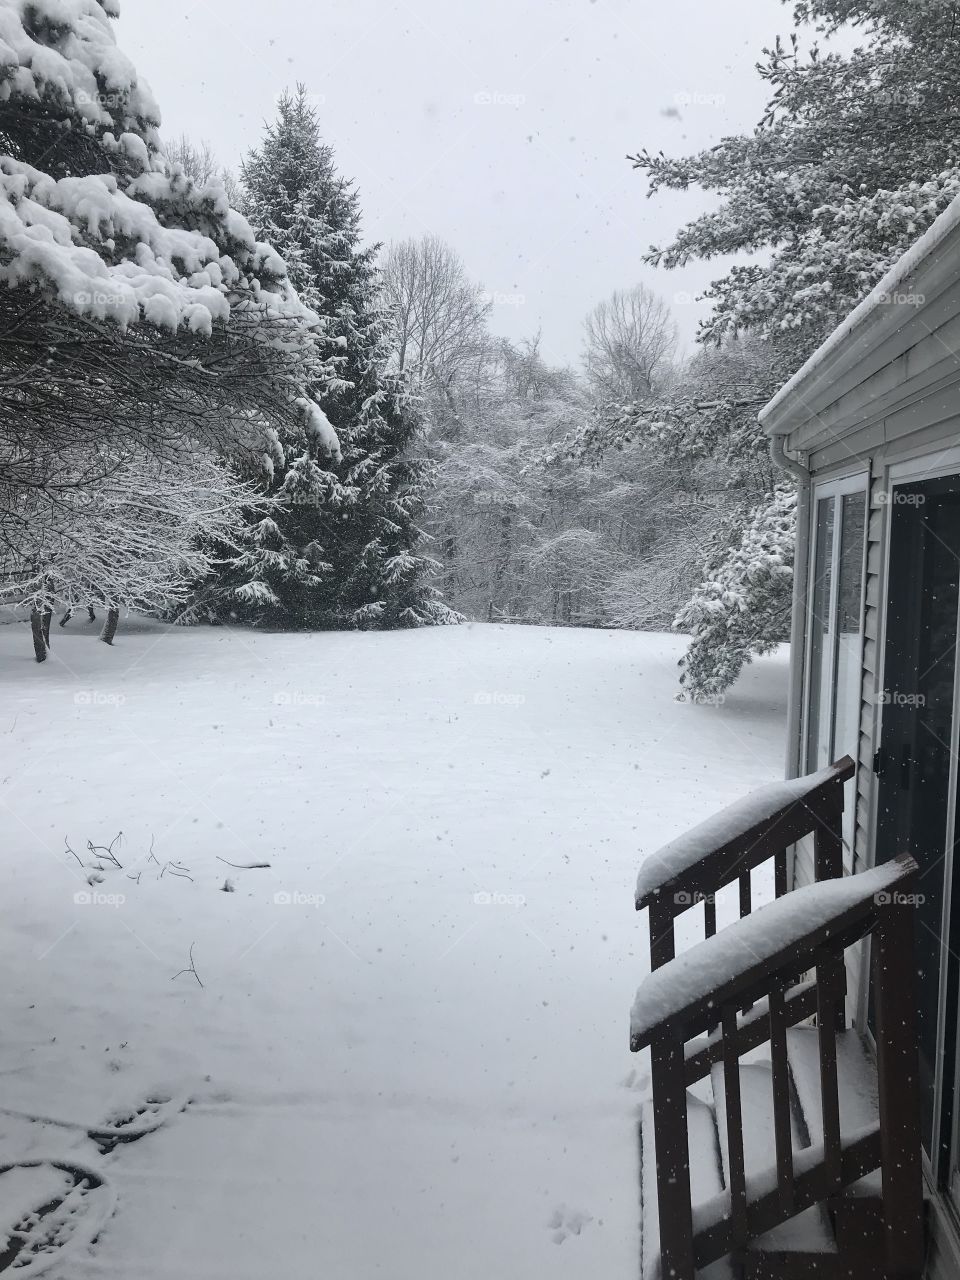 Crazy snowy day in March 